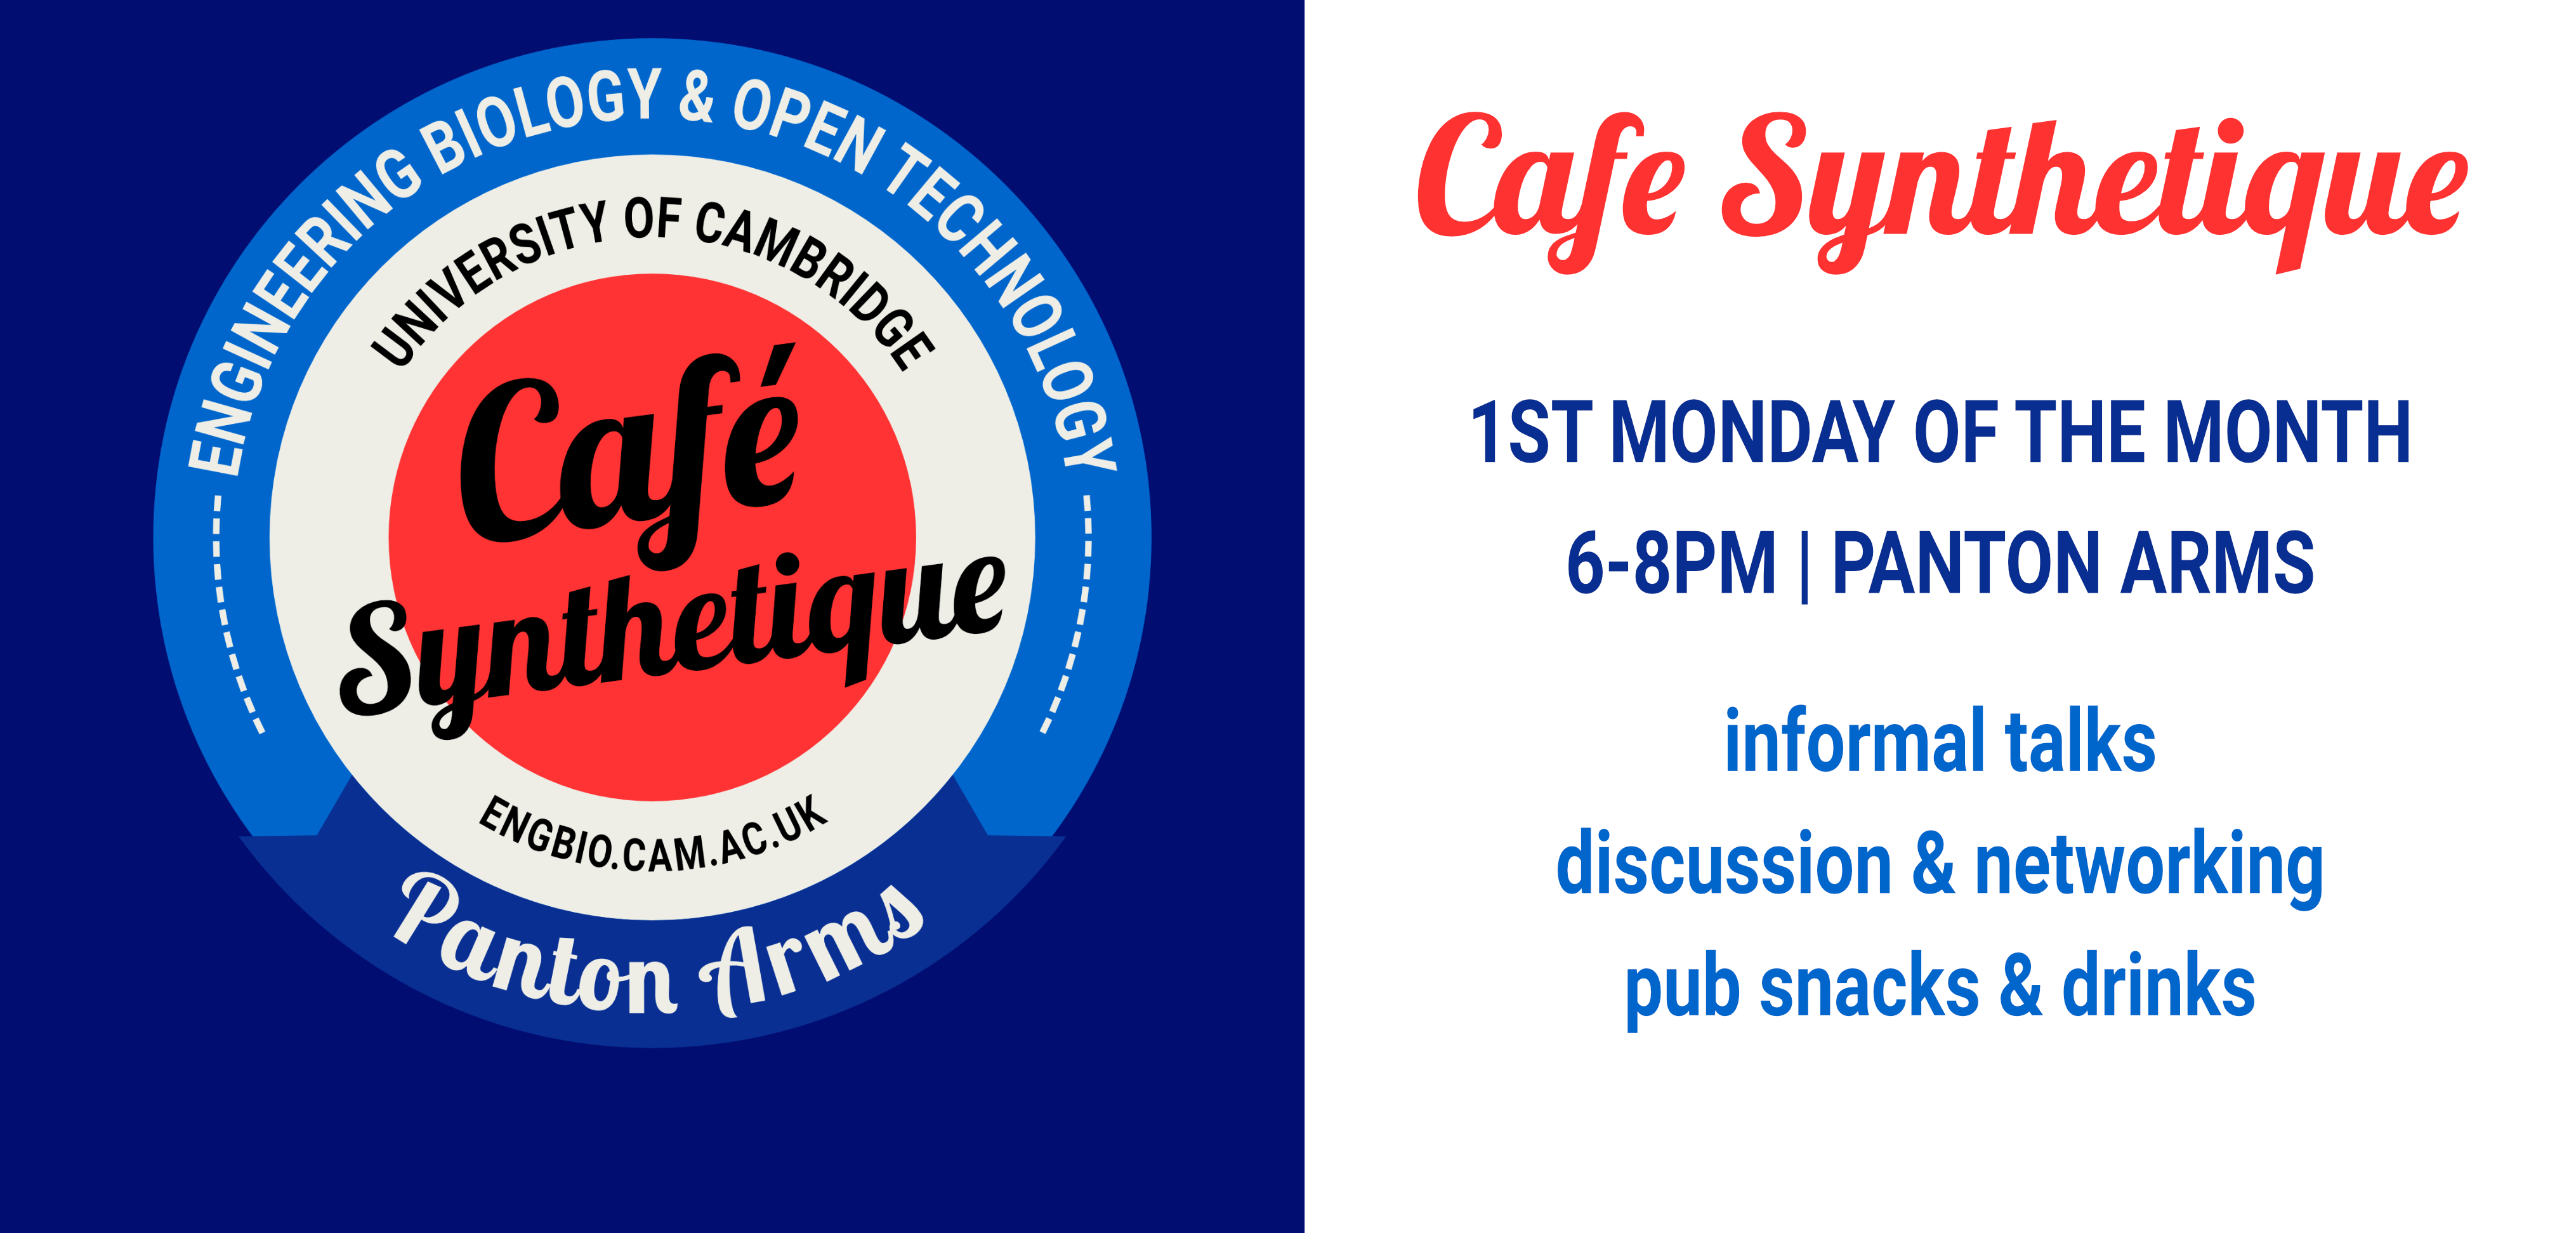 Left: Cafe Synthetique Logo on a dark blue background. Right: blue and red text on a white background "Cafe Synthetique | 1st Monday fo the Month | 6-8pm, Panton Arms | informal talks, discussion and networking, pub snacks and drinks"